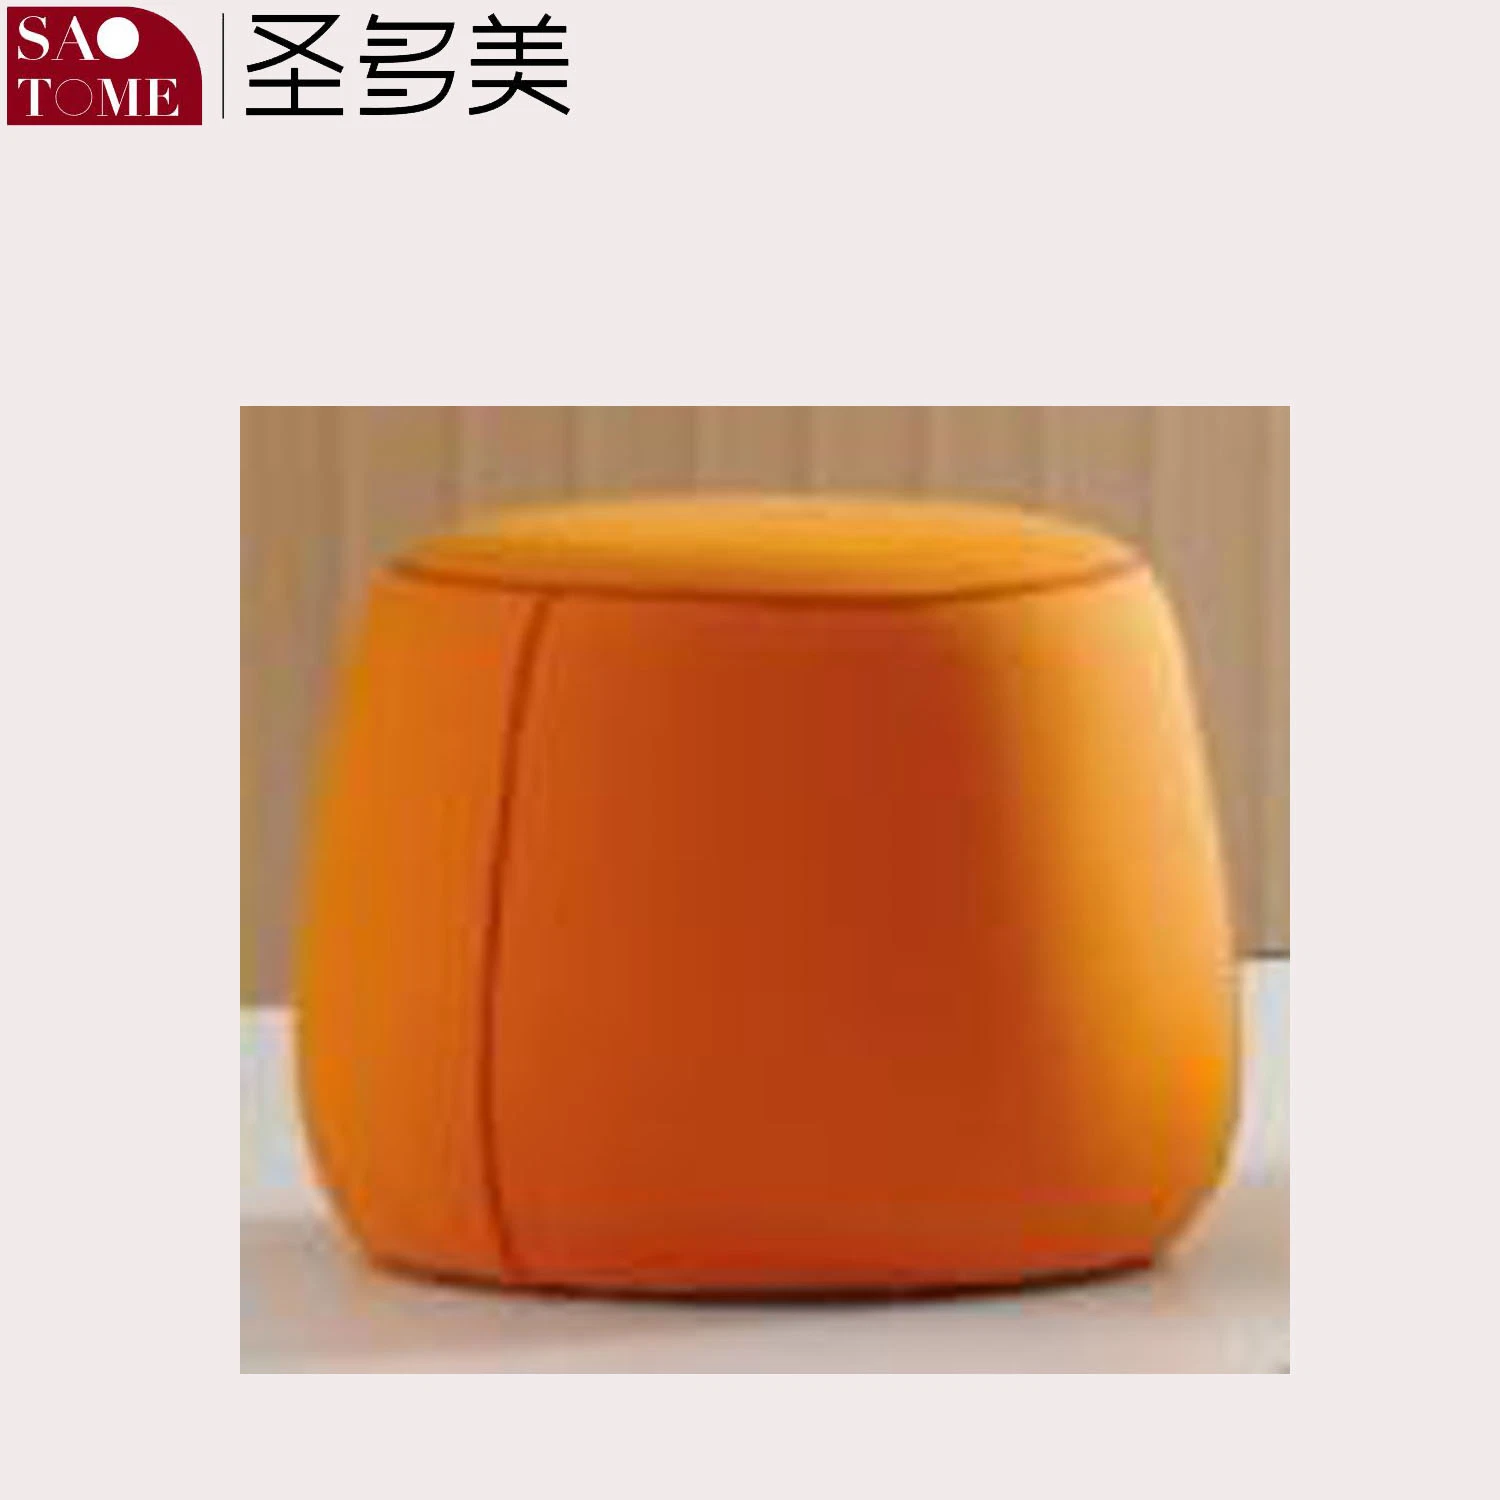 Home Solid Wood Small Stool Living Room Creative Coffee Table Stool Round Stool Changing Shoe Stool